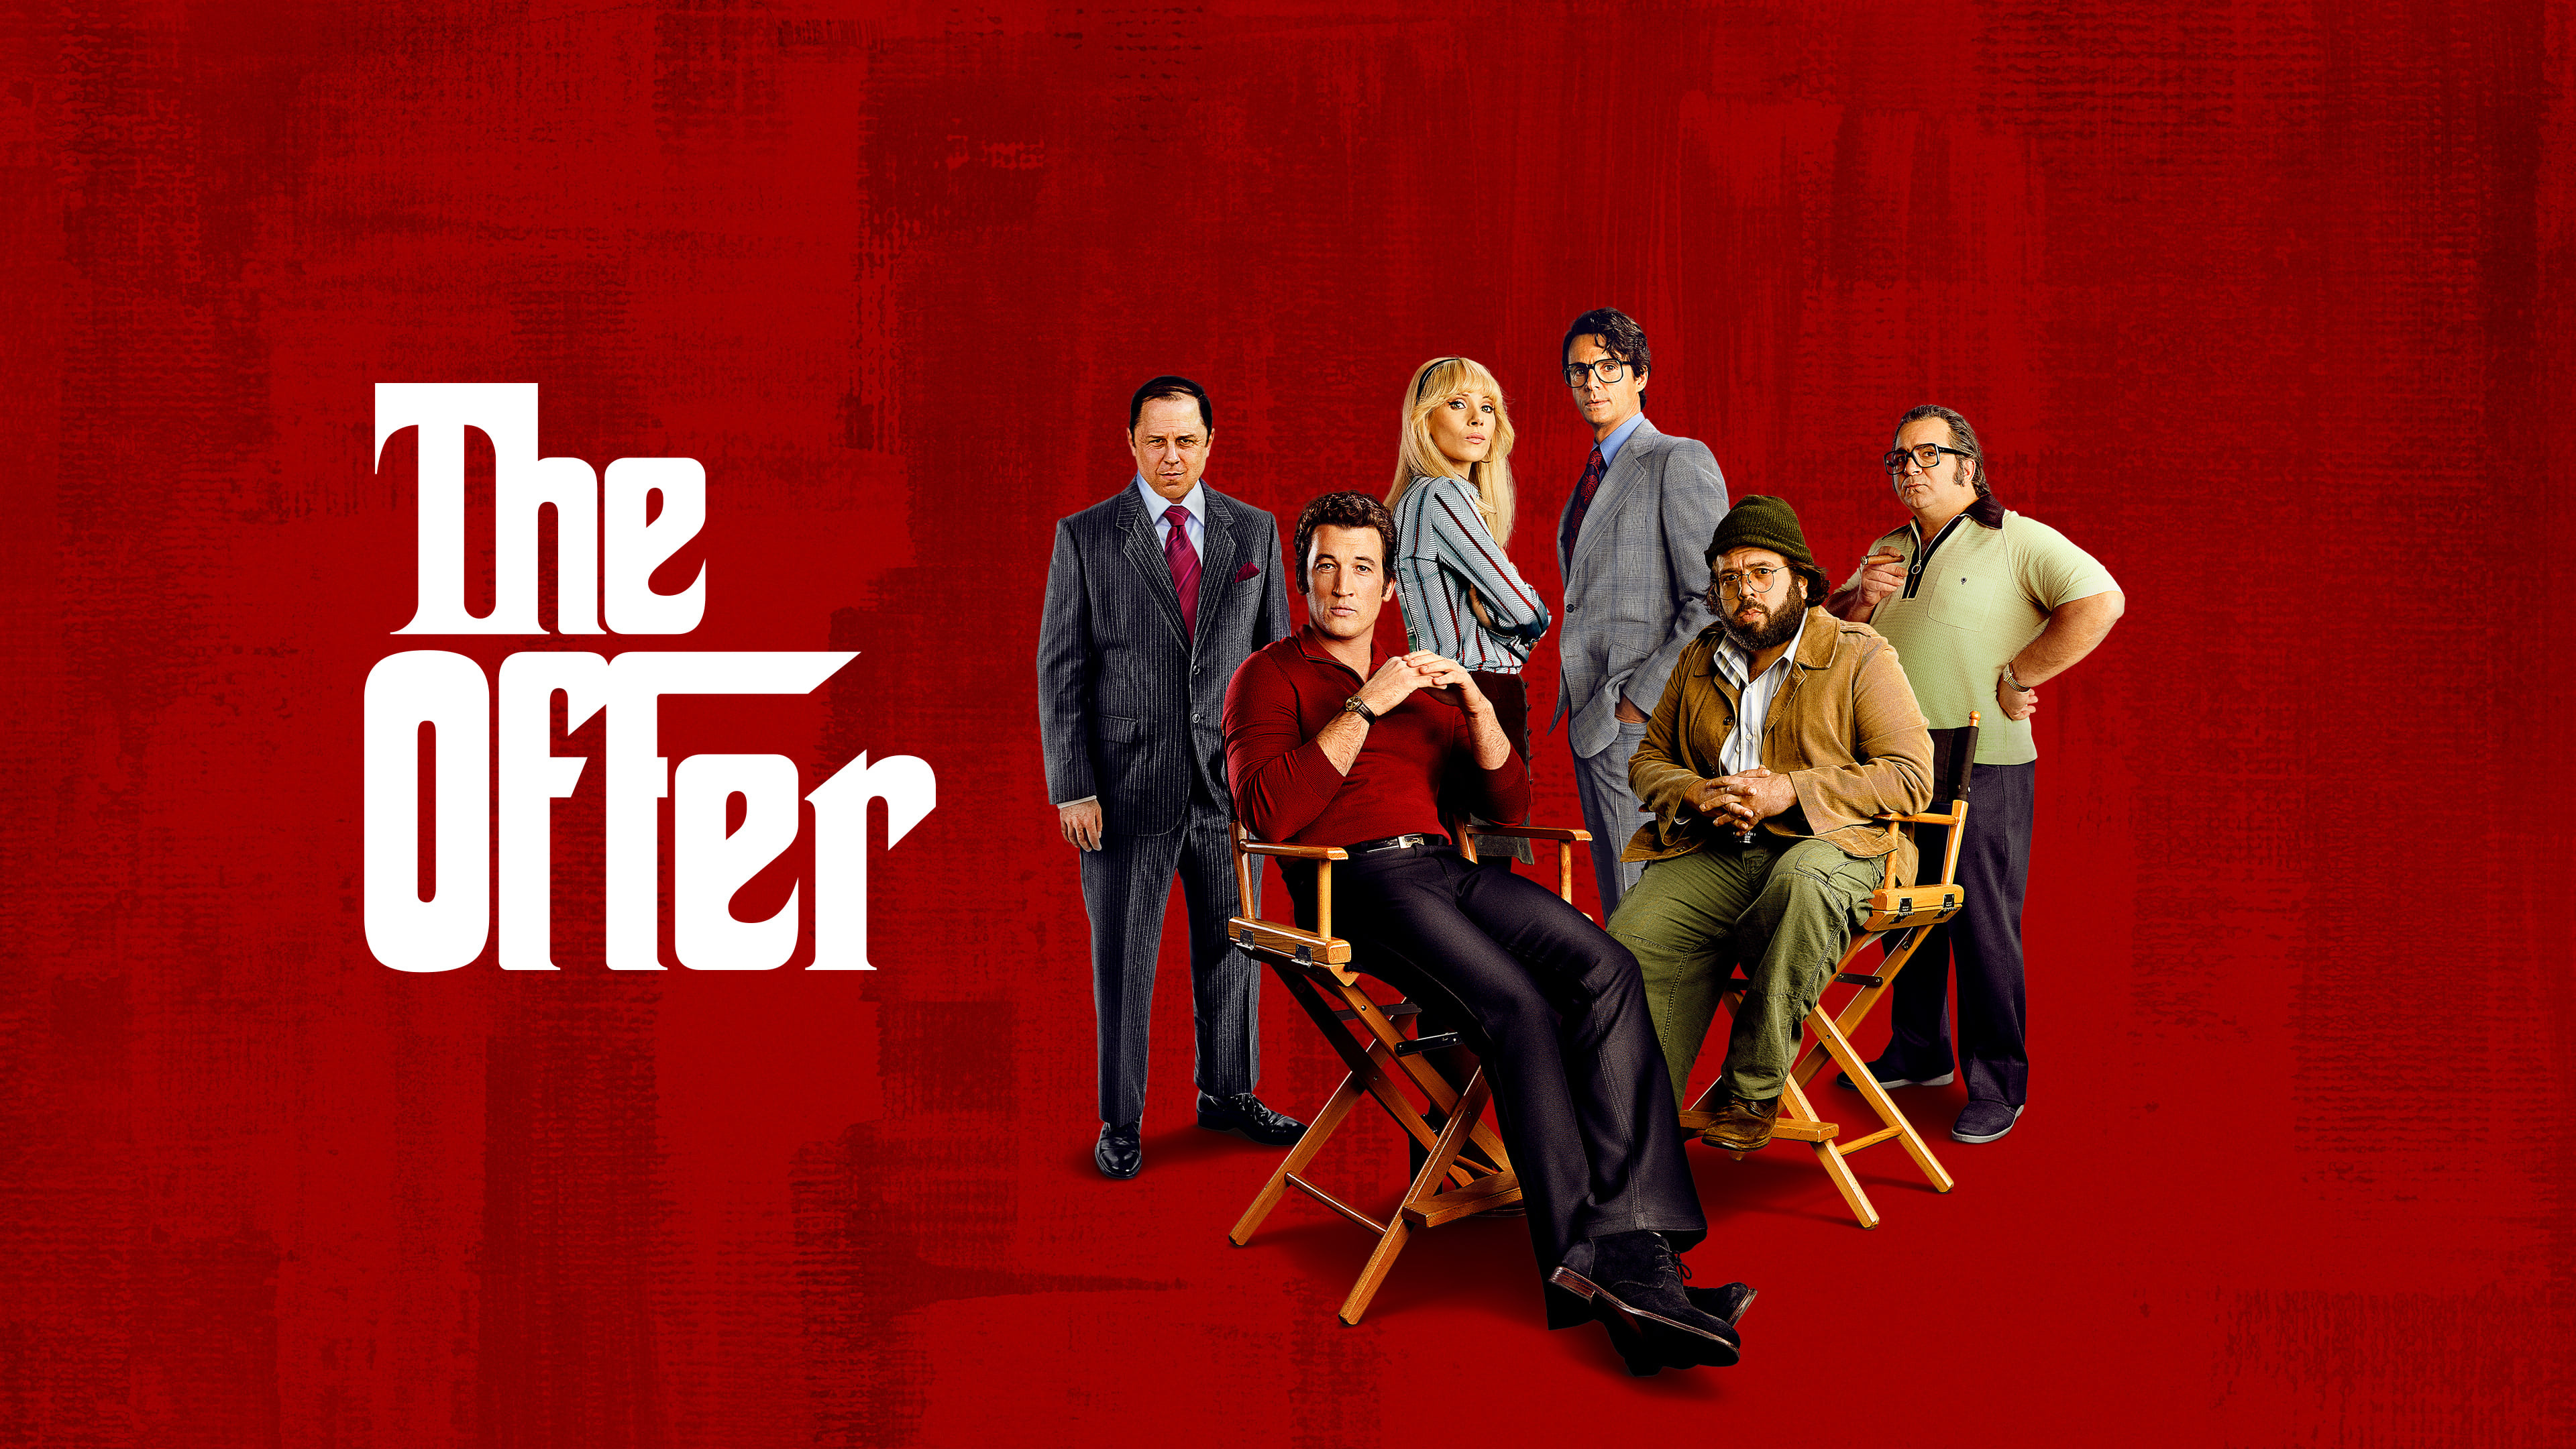 The Offer (TV Mini Series): An American biographical drama miniseries created by Michael Tolkin. 3840x2160 4K Background.